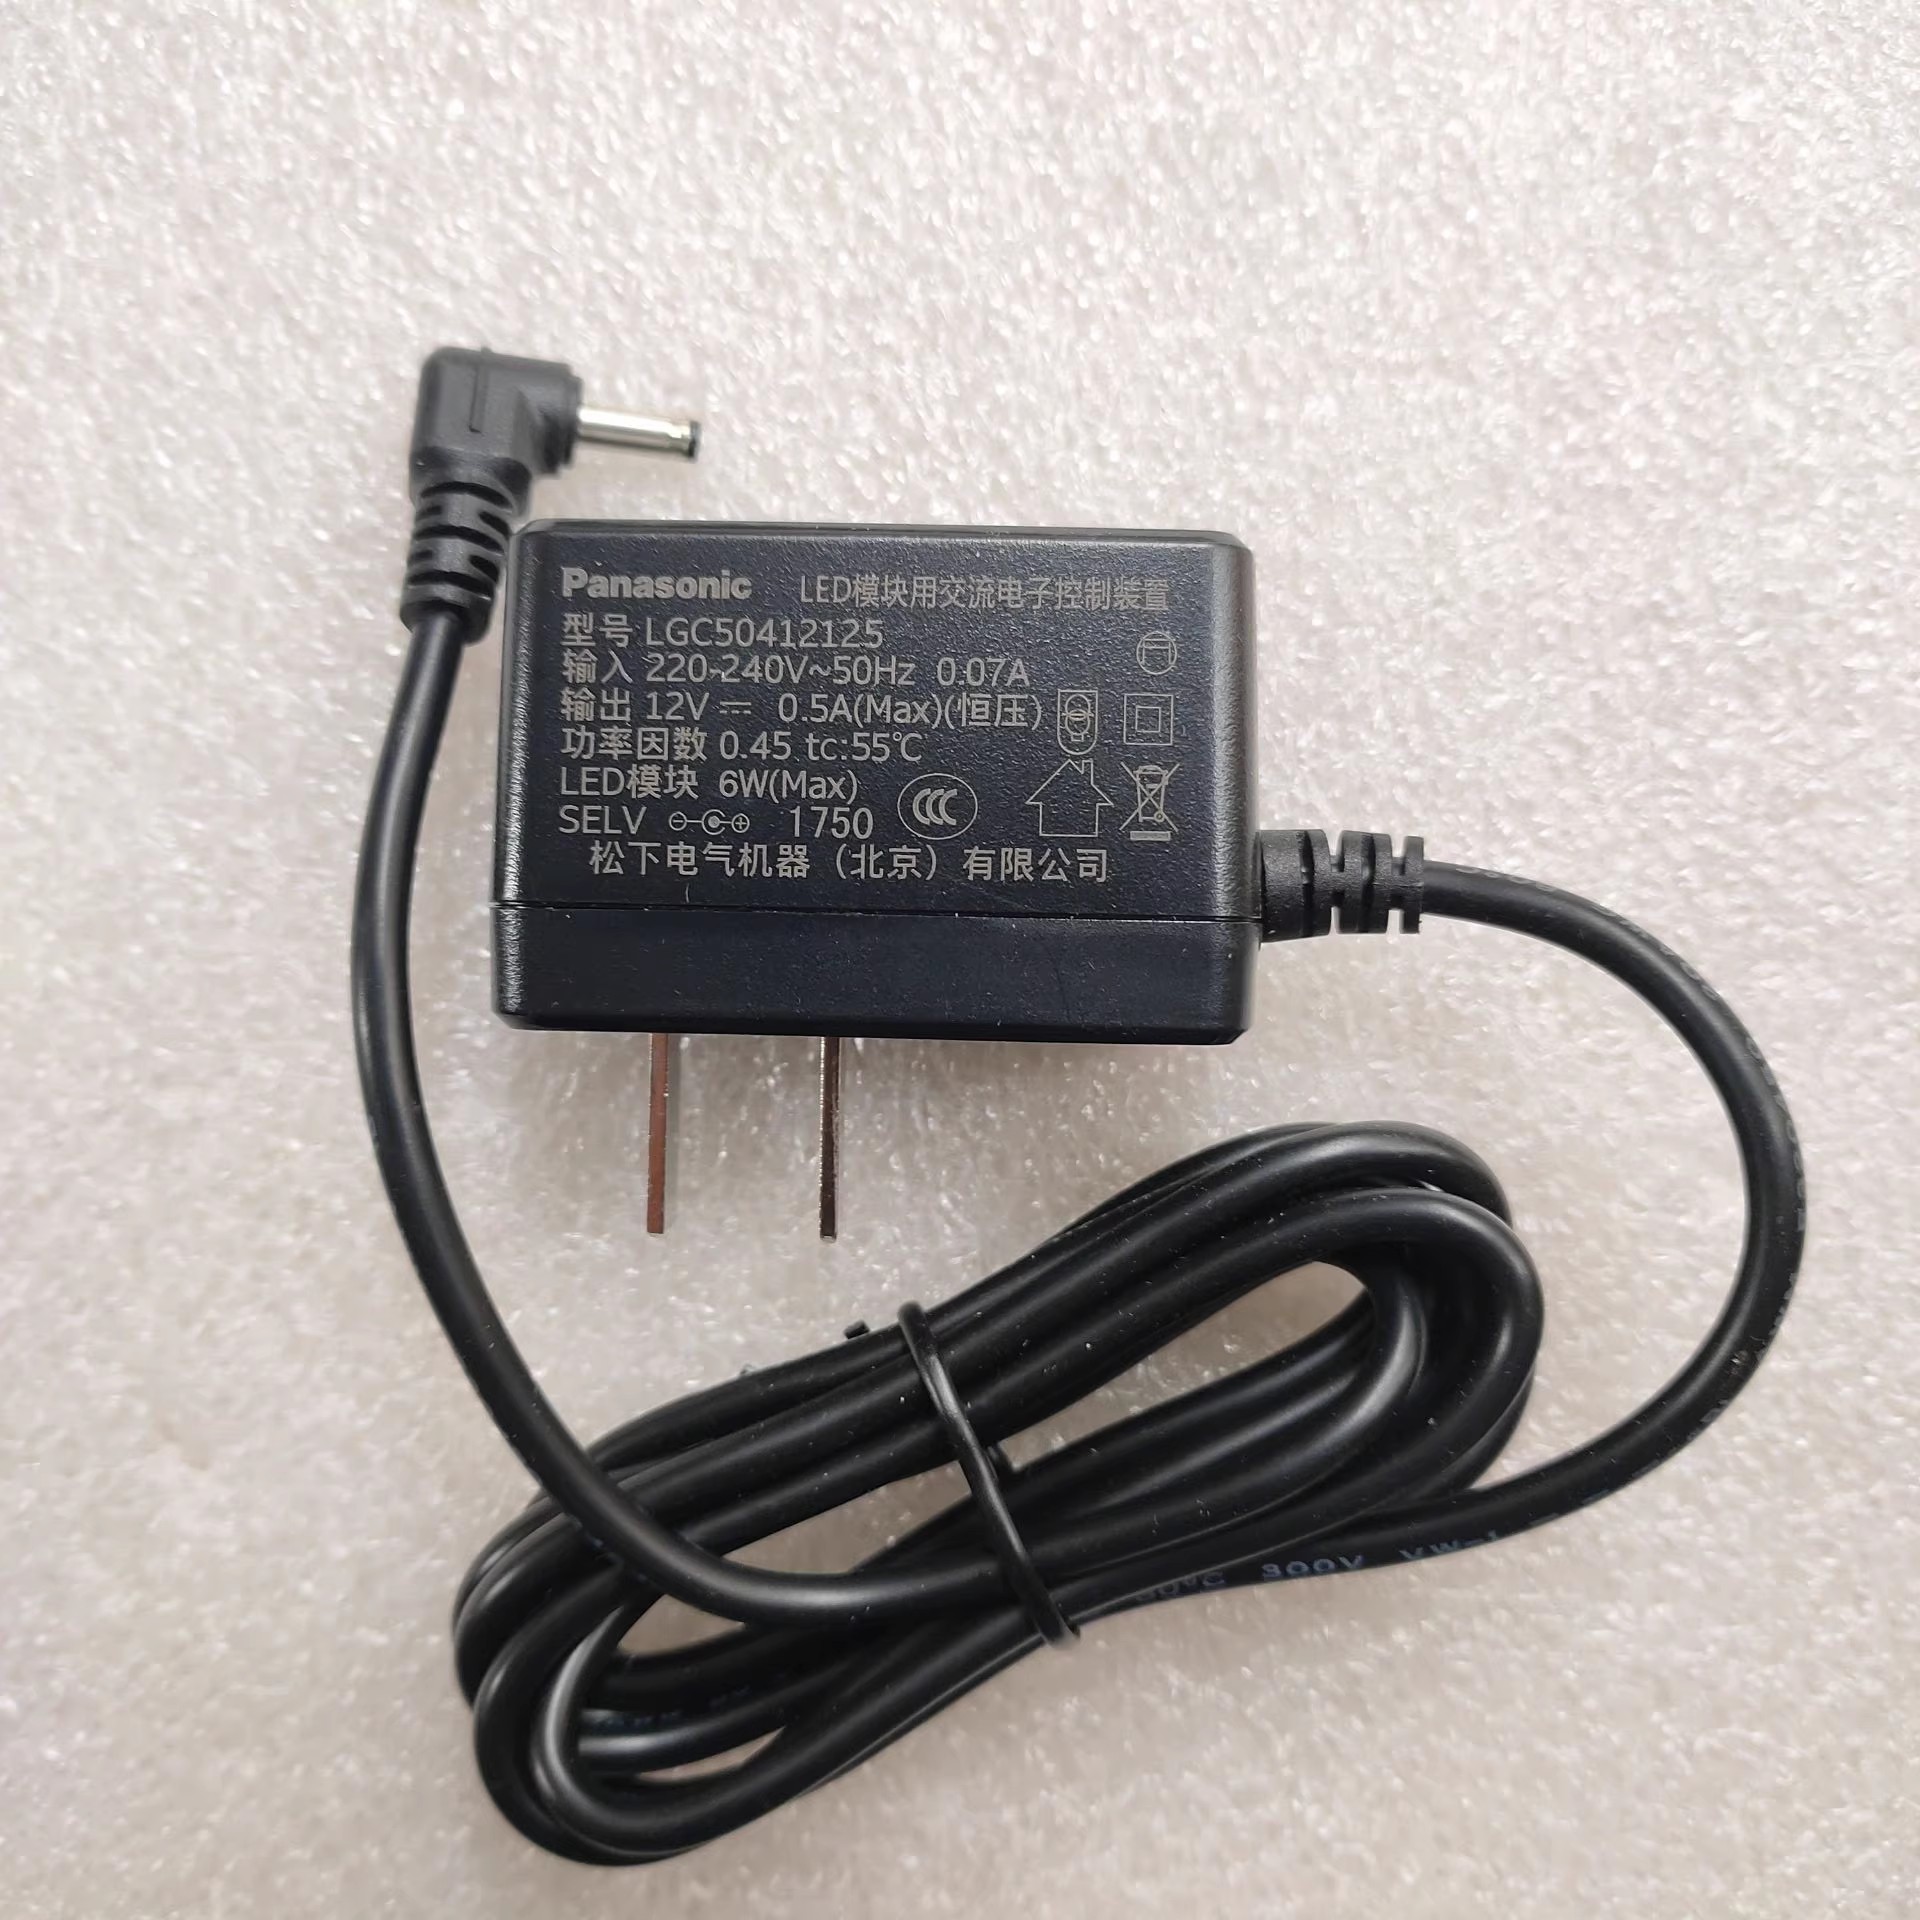 *Brand NEW* GSQLD2210172 Panasonic SQ-LE530 LED 12V 0.5A AC DC ADAPTHE POWER Supply